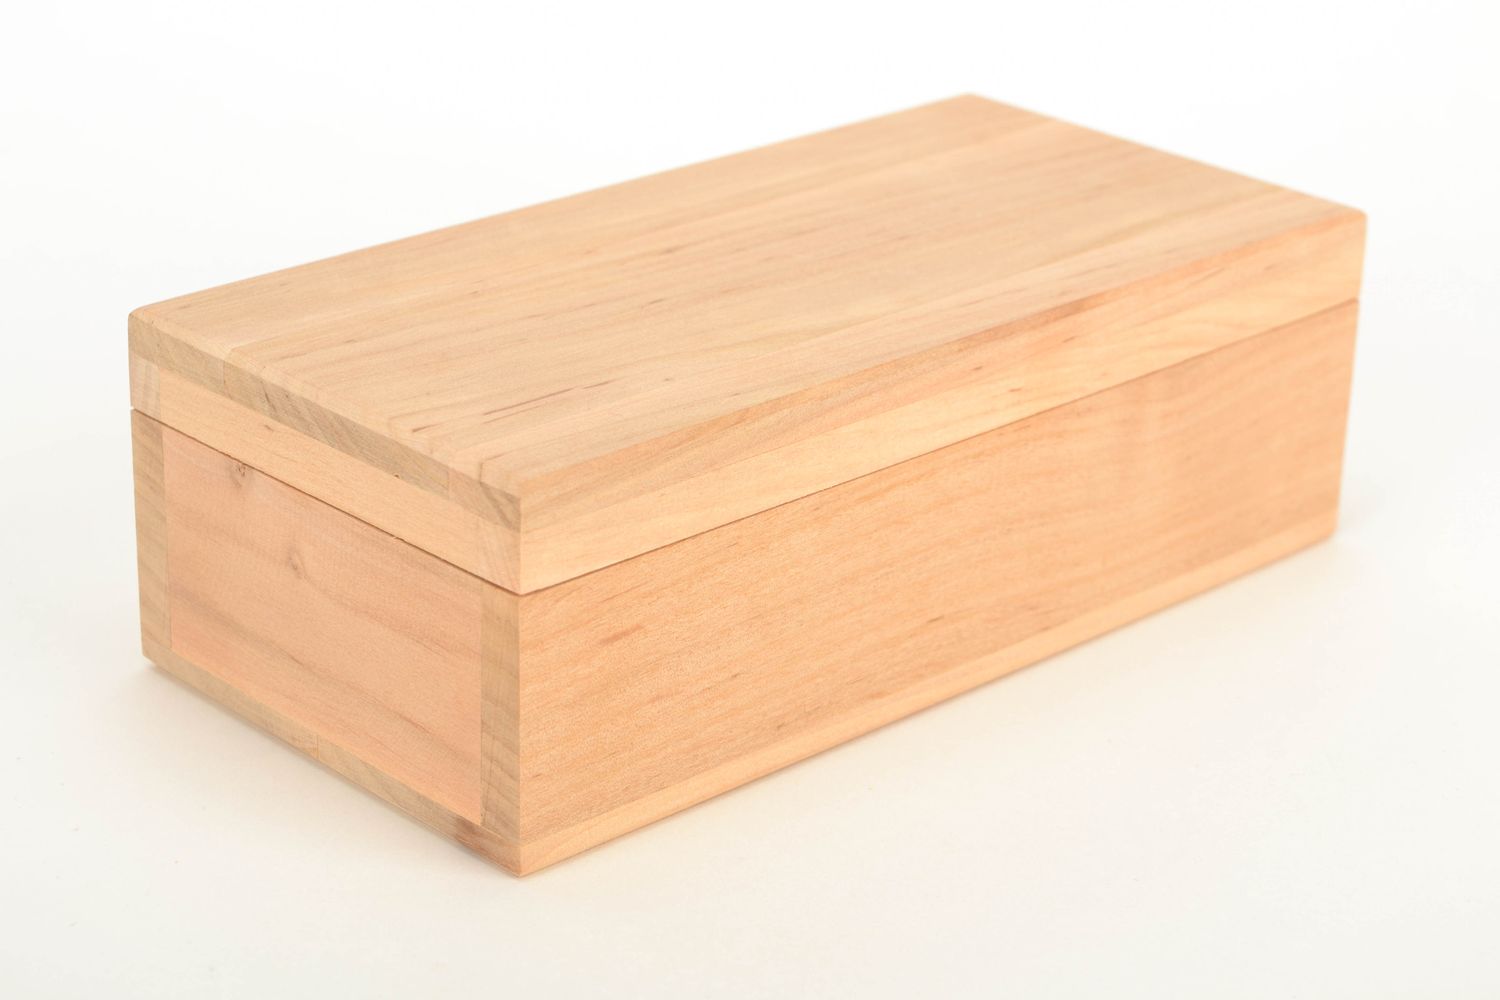 Alder wood craft blank for jewelry box photo 1